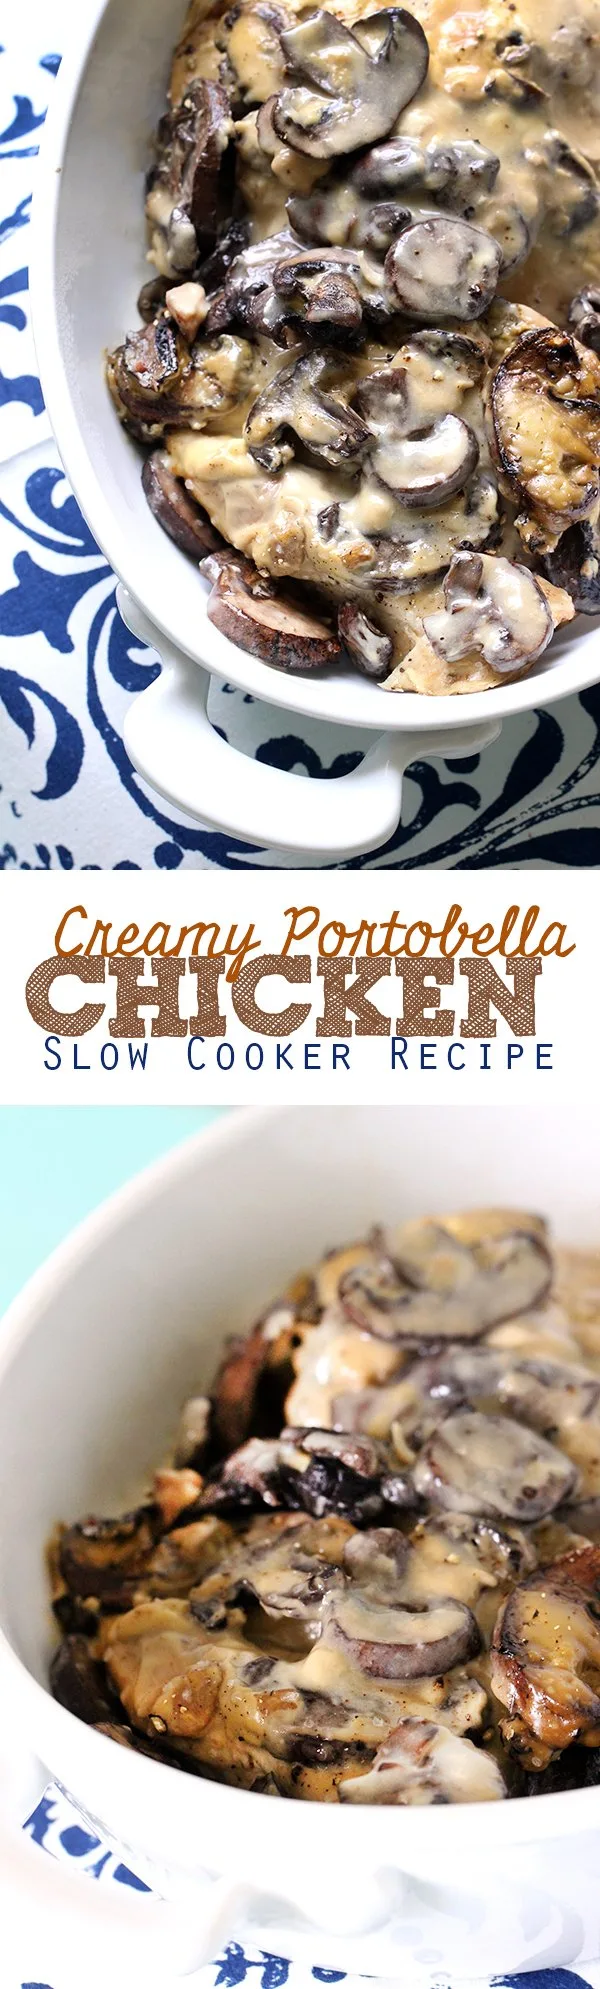 What!? 3 Ingredients to make this slammin' slow cooker chicken. #slowcooker #crockpot